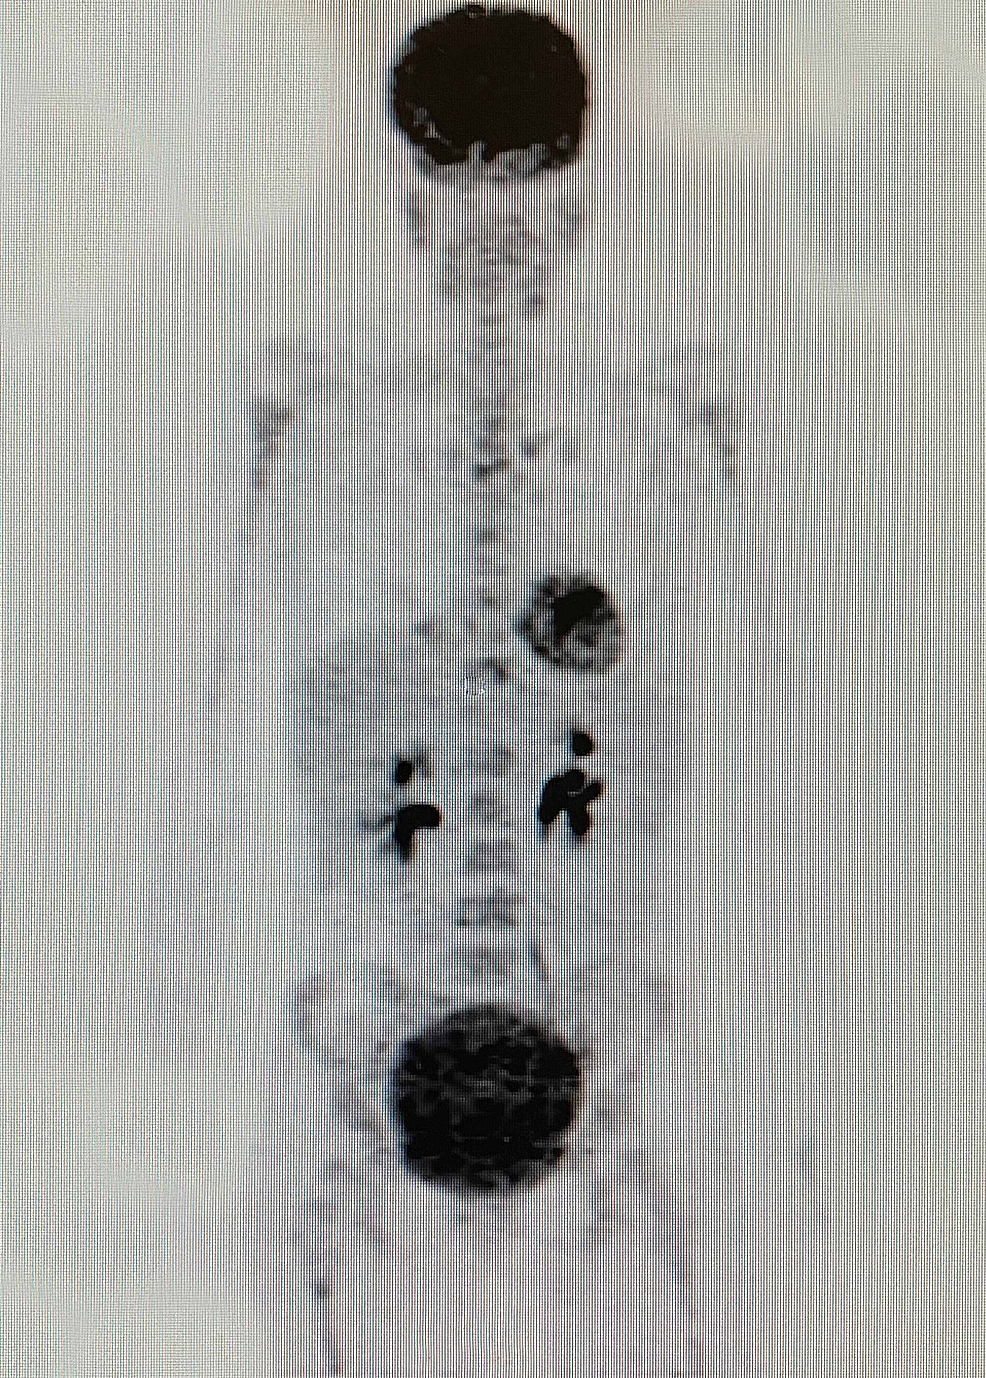 Whole-body- (18F) -FDG-PET-CT-scan-done-made-on-April-25, -2019-after-nine-cycles-of-MSCT, -KD, -HT, -and-HBOT-treatment- care arată-absorbția-FDG-patologică, -indicativ-a-unui-răspuns-complet